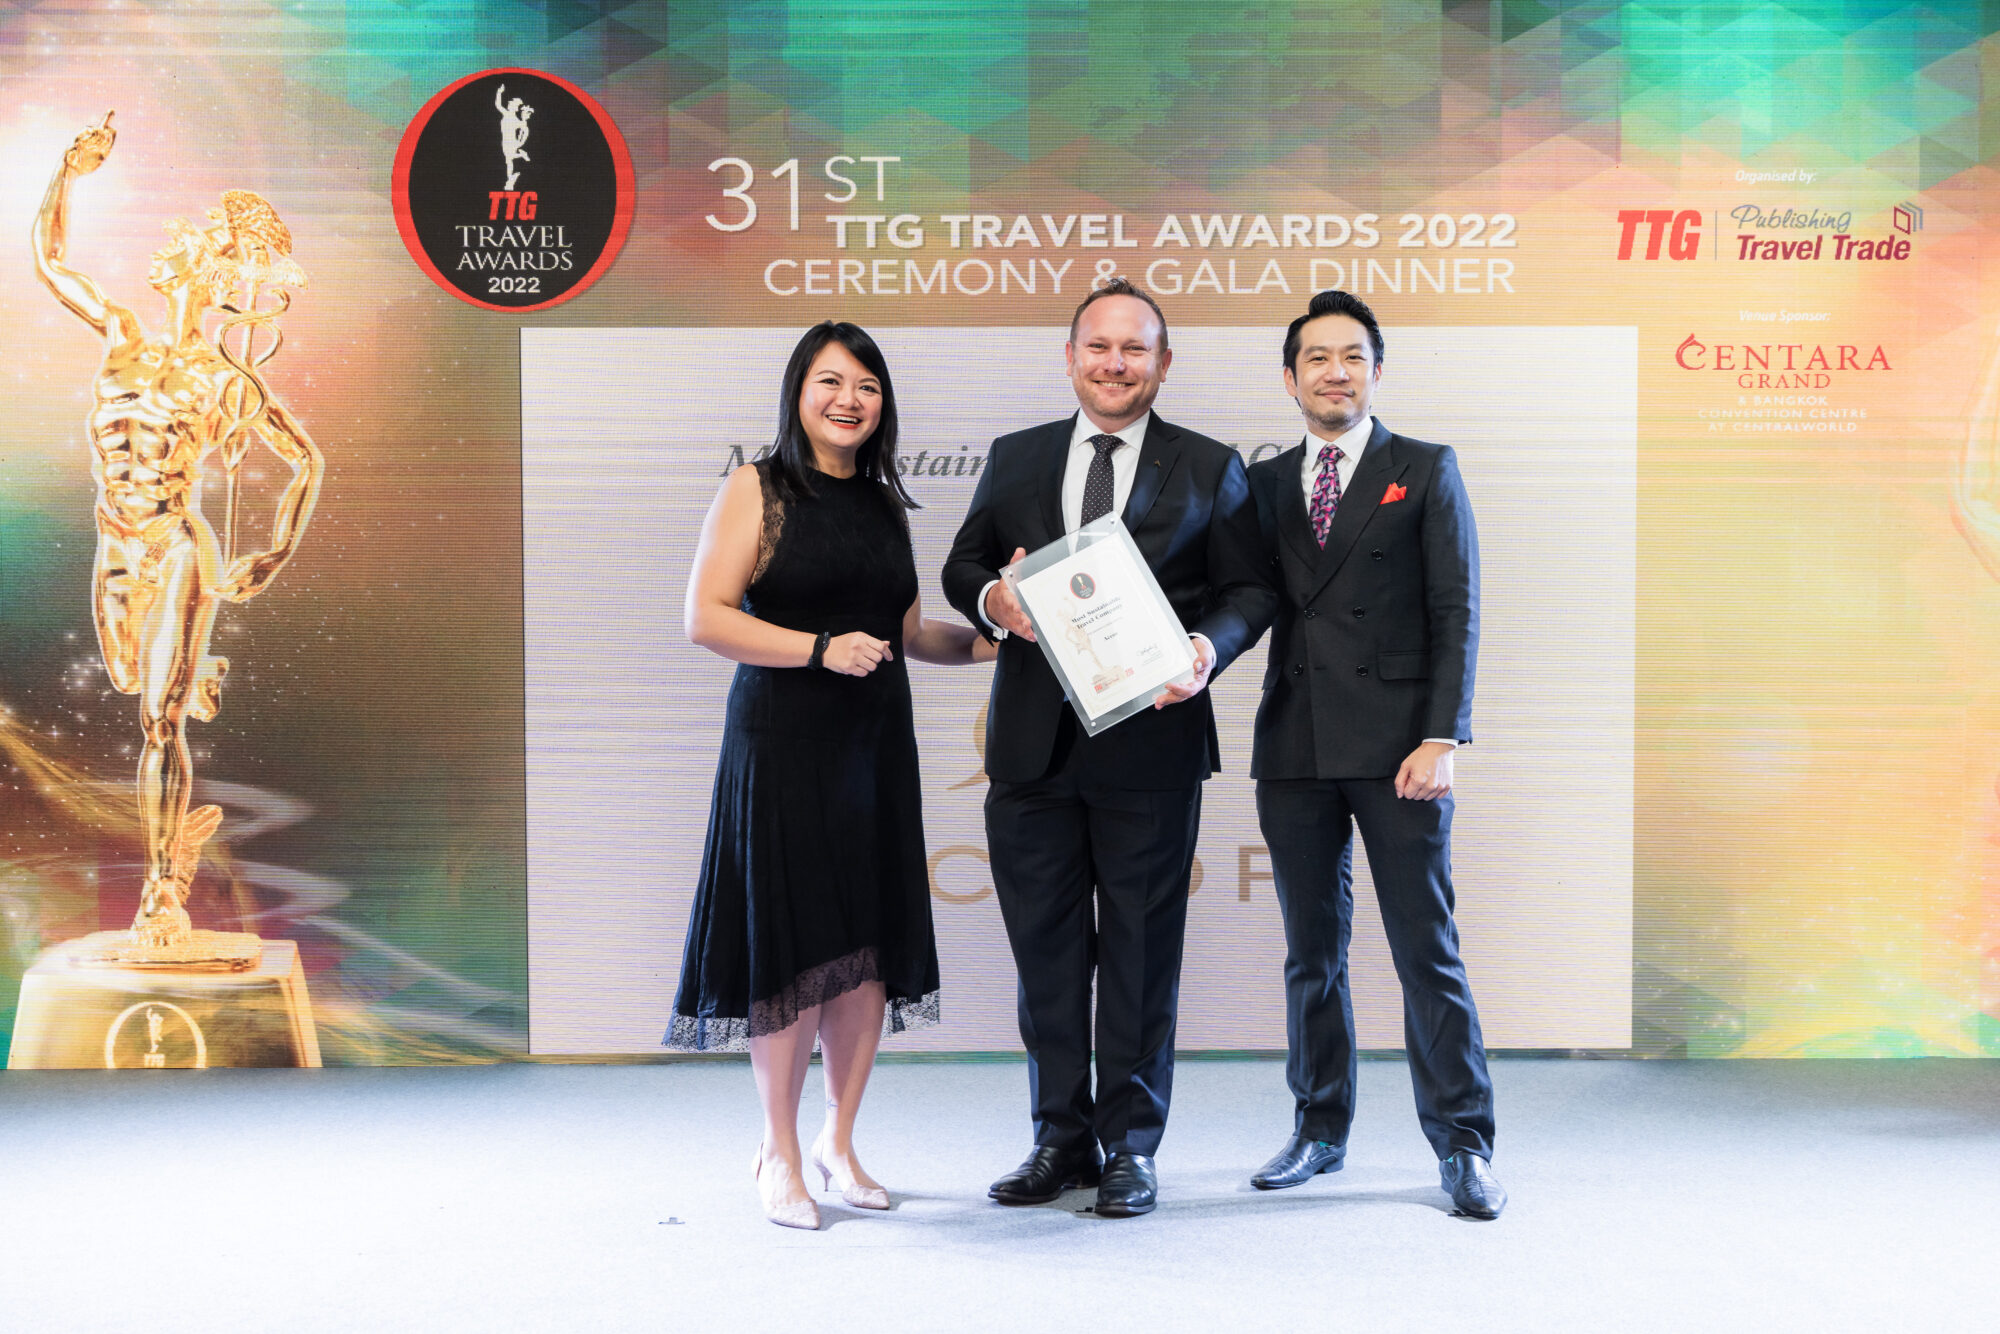 Accor-recognised-as-the-Most-Sustainable-Travel-Company-at-the-TTG-Travel-Awards-3.jpg